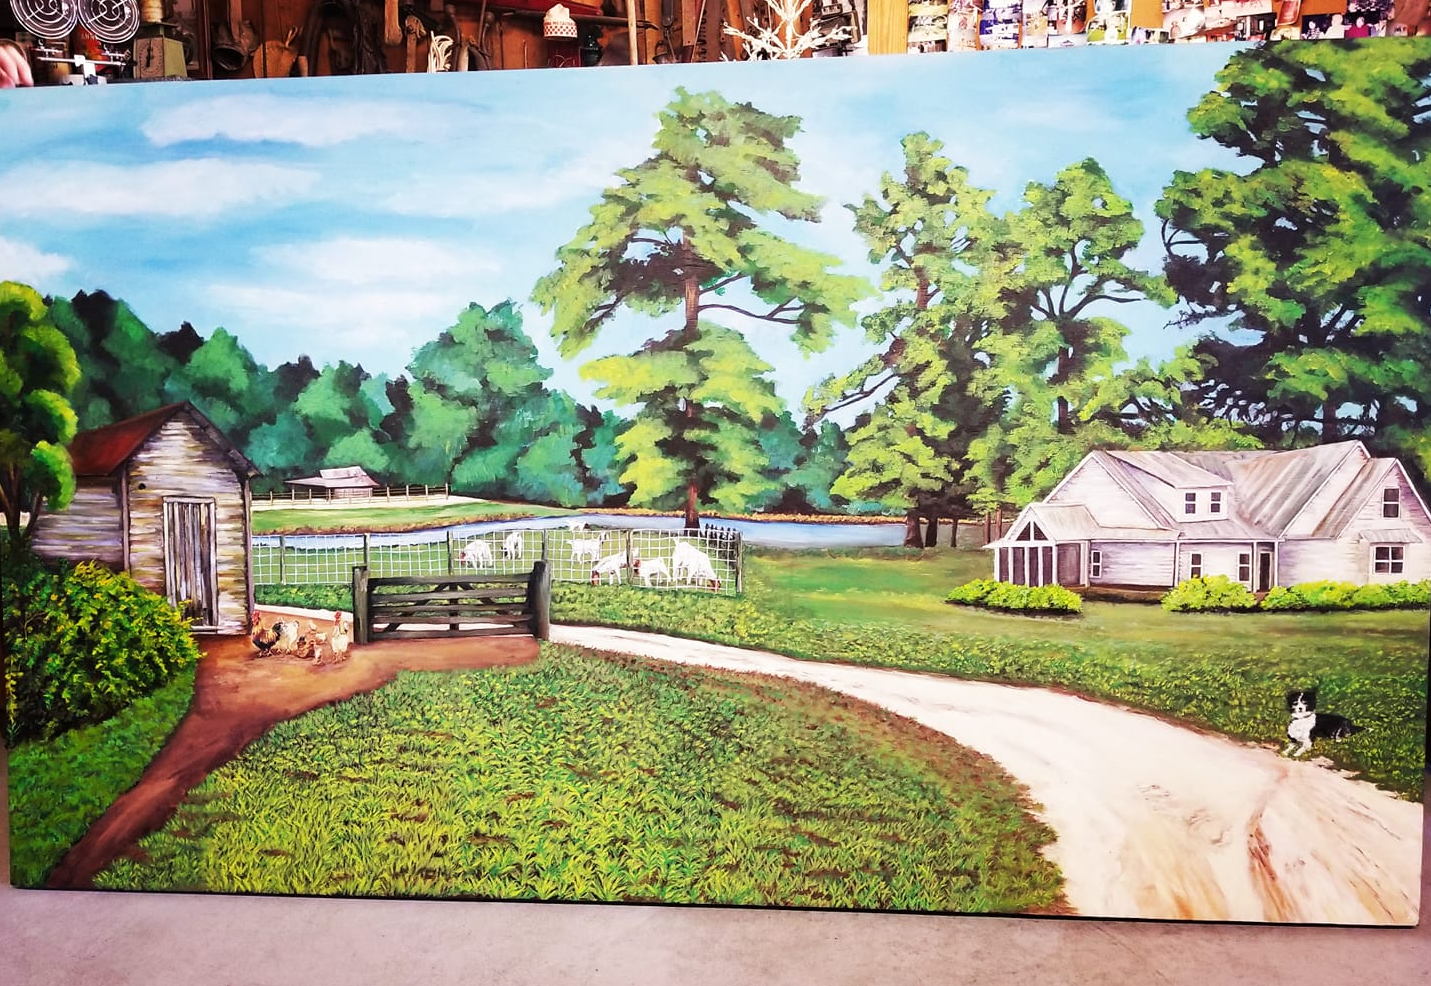 Photo of a mural of a farmhouse, a pond, and goats in a fence